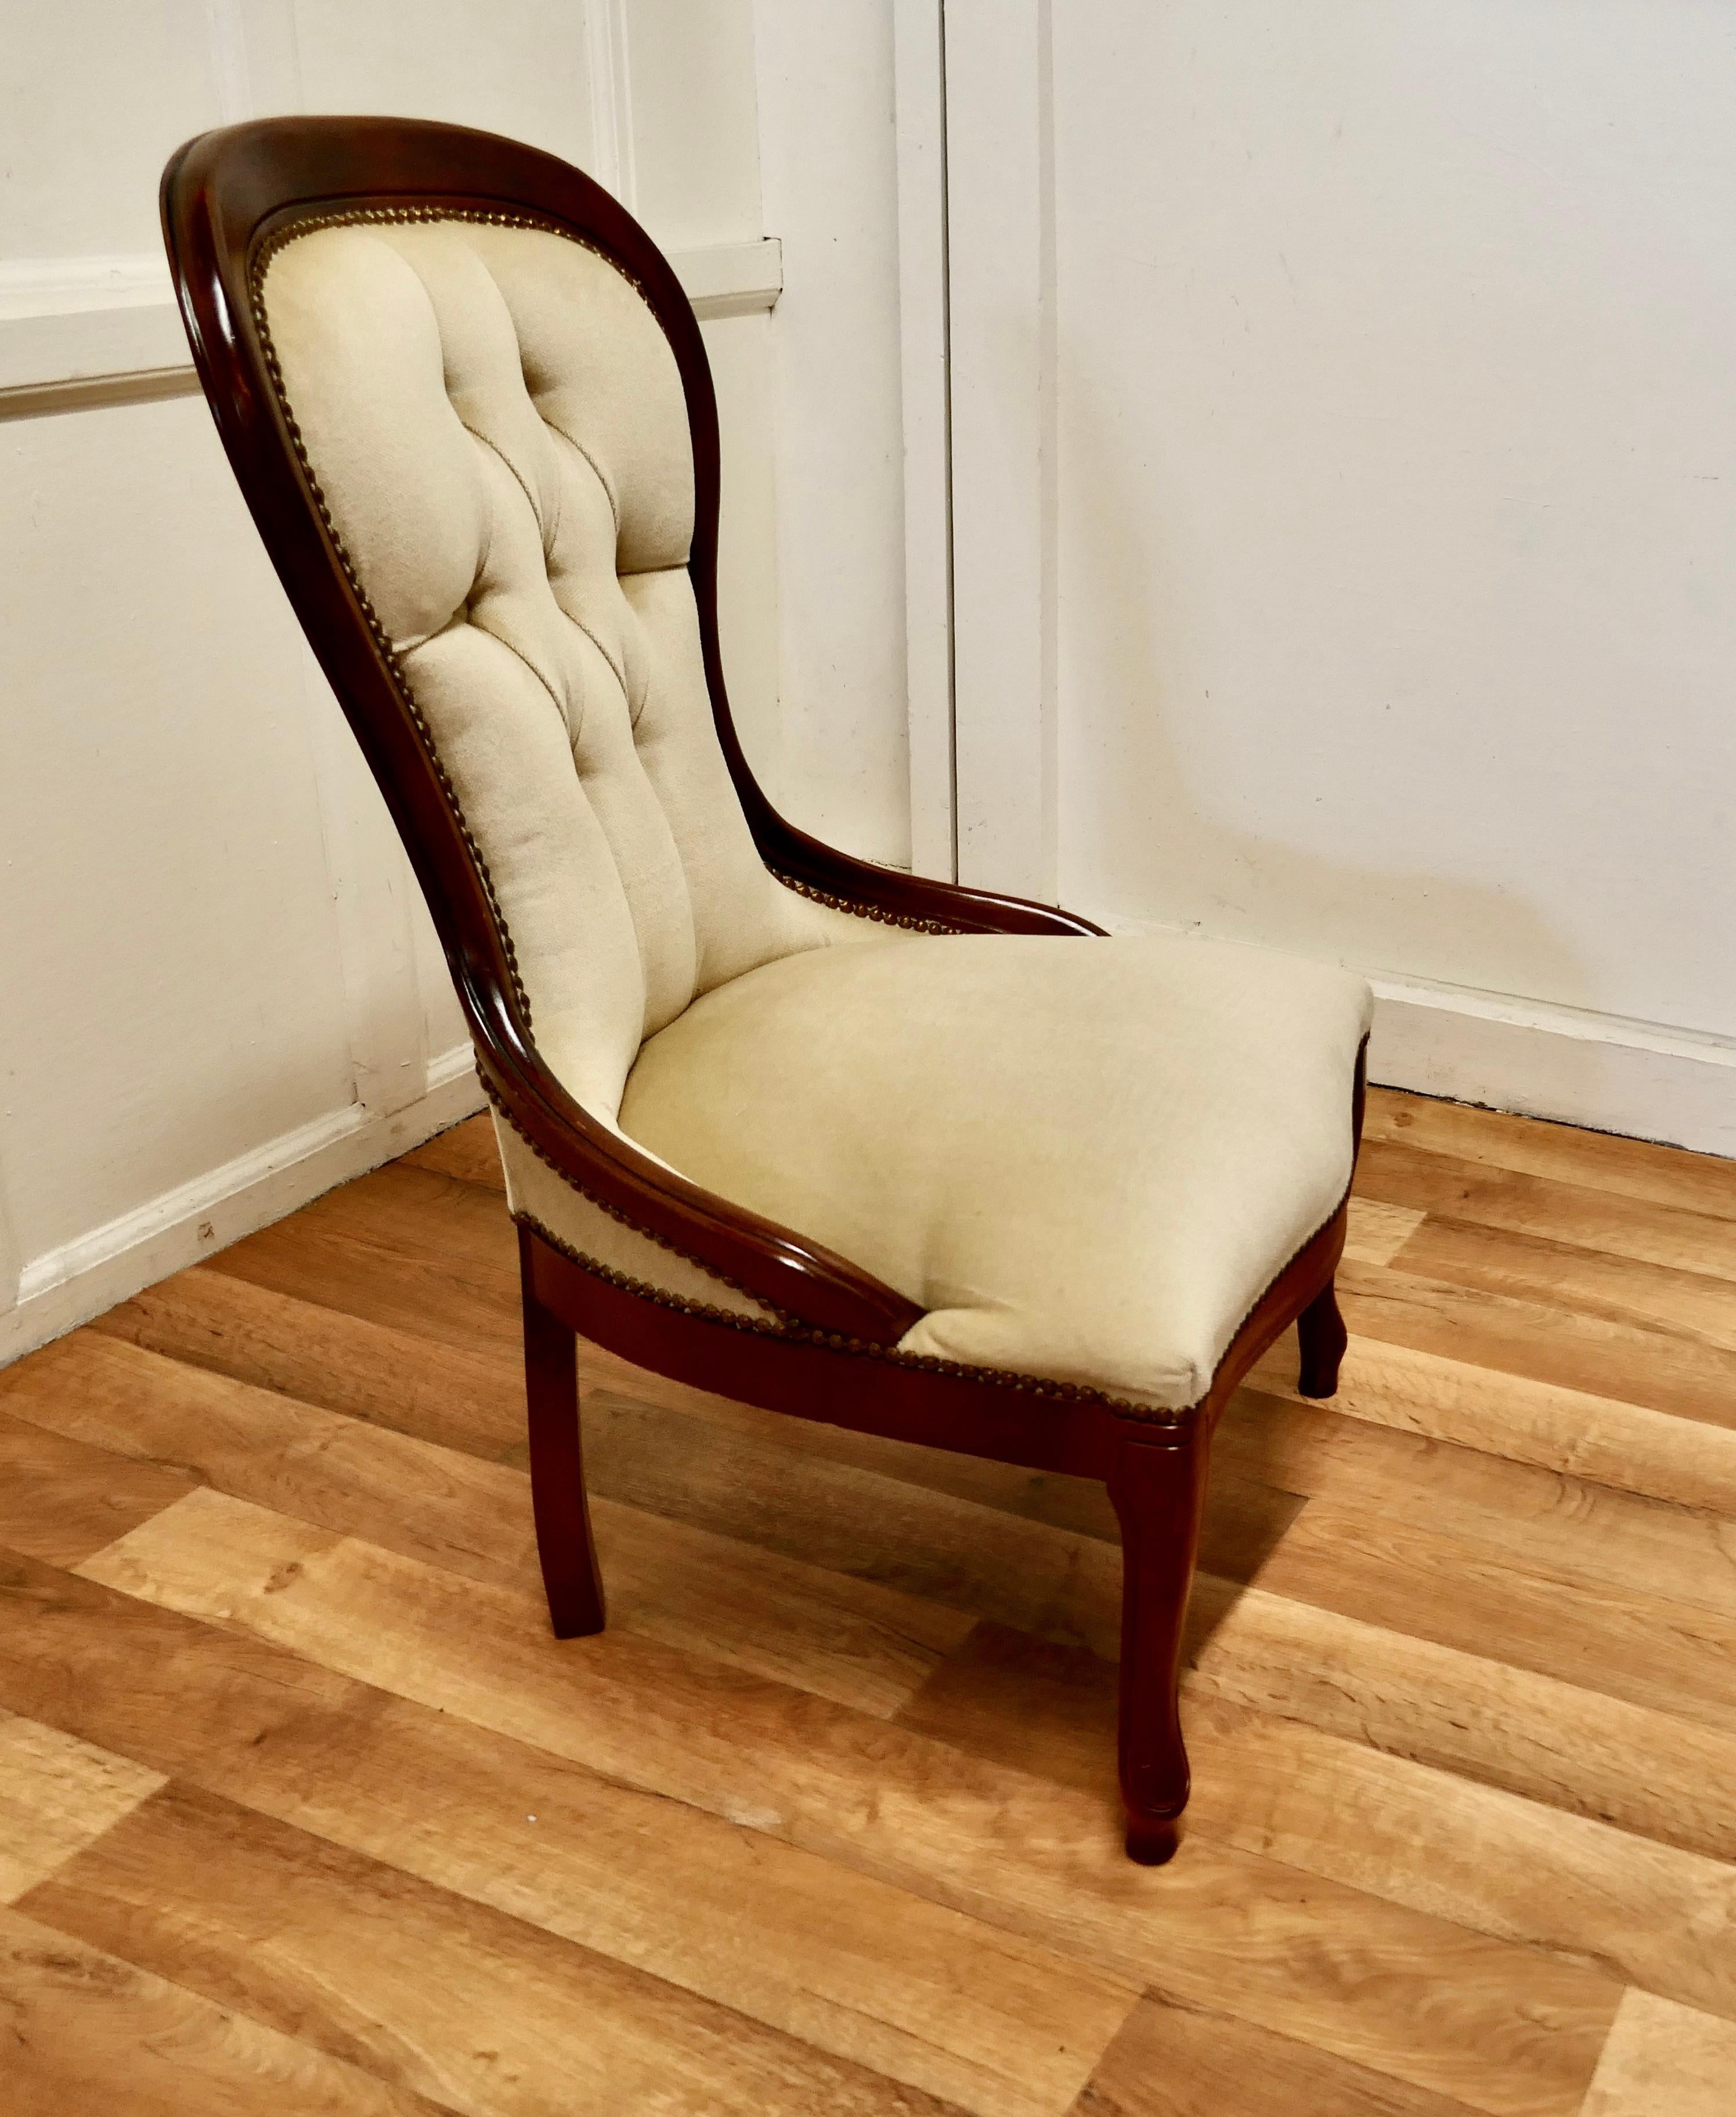 Beech Good Victorian Style Spoon Back Easy Chair For Sale